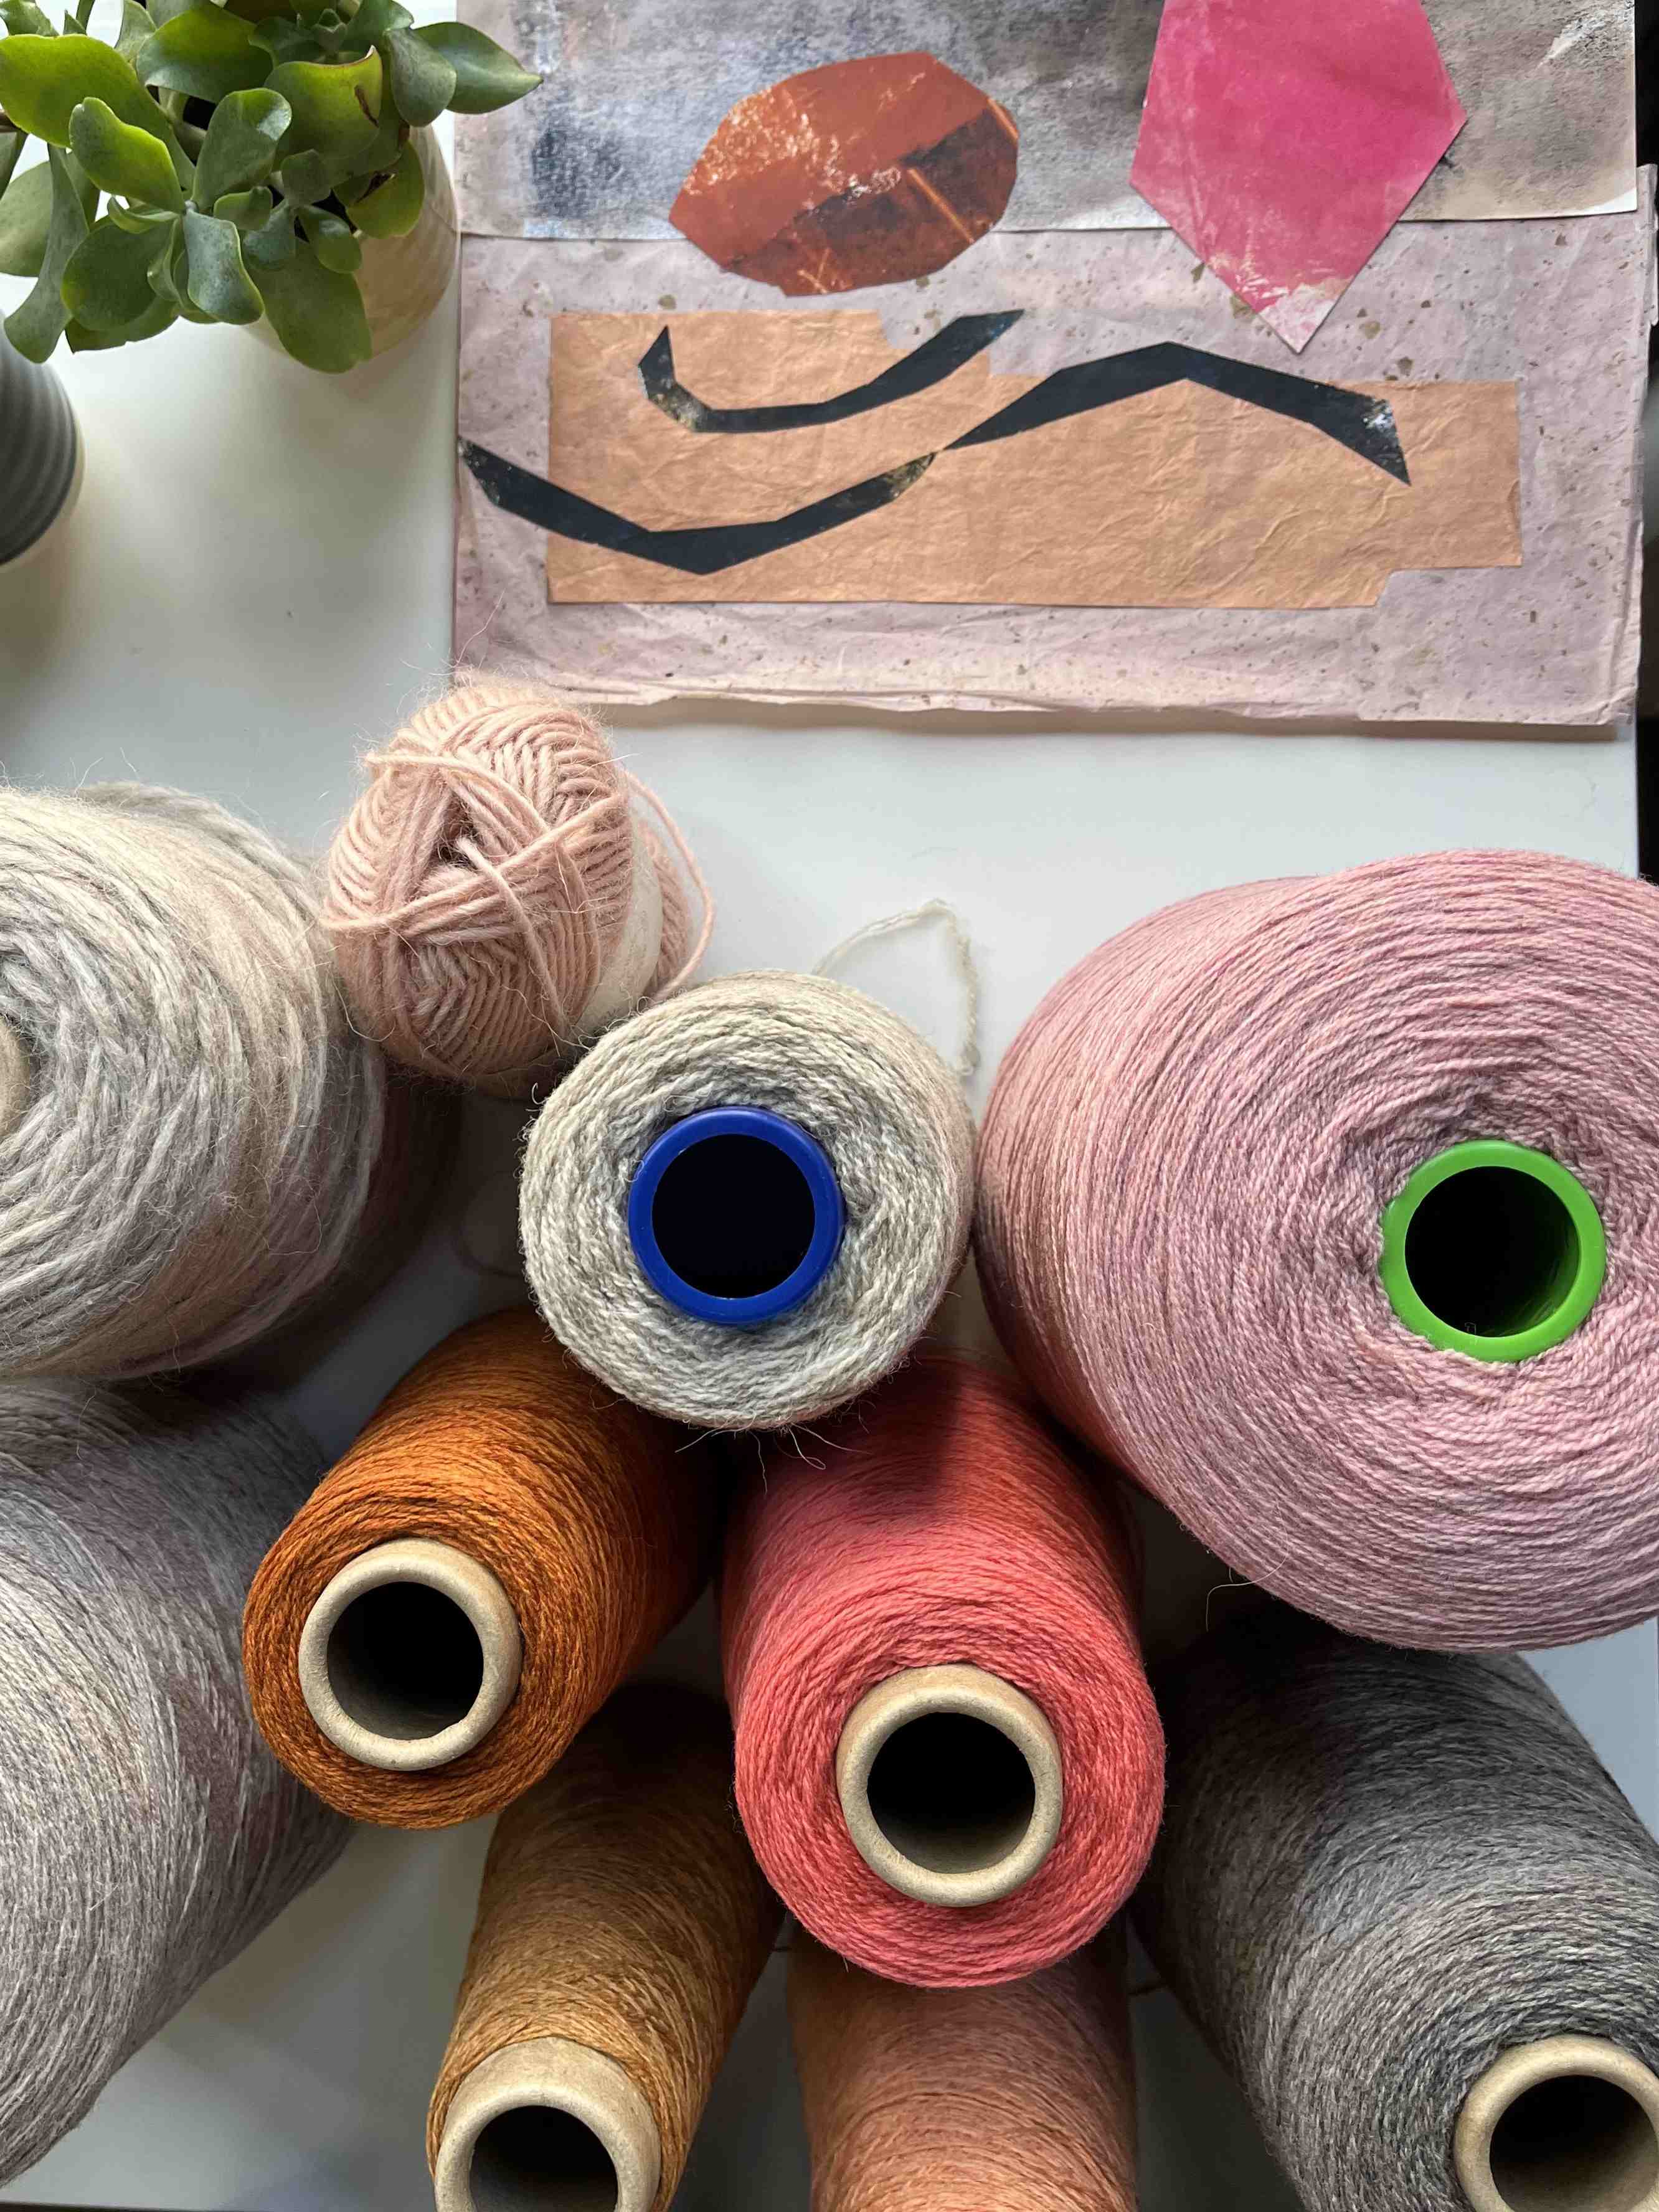 Yarns in ecru, pinks and ochres for scarves